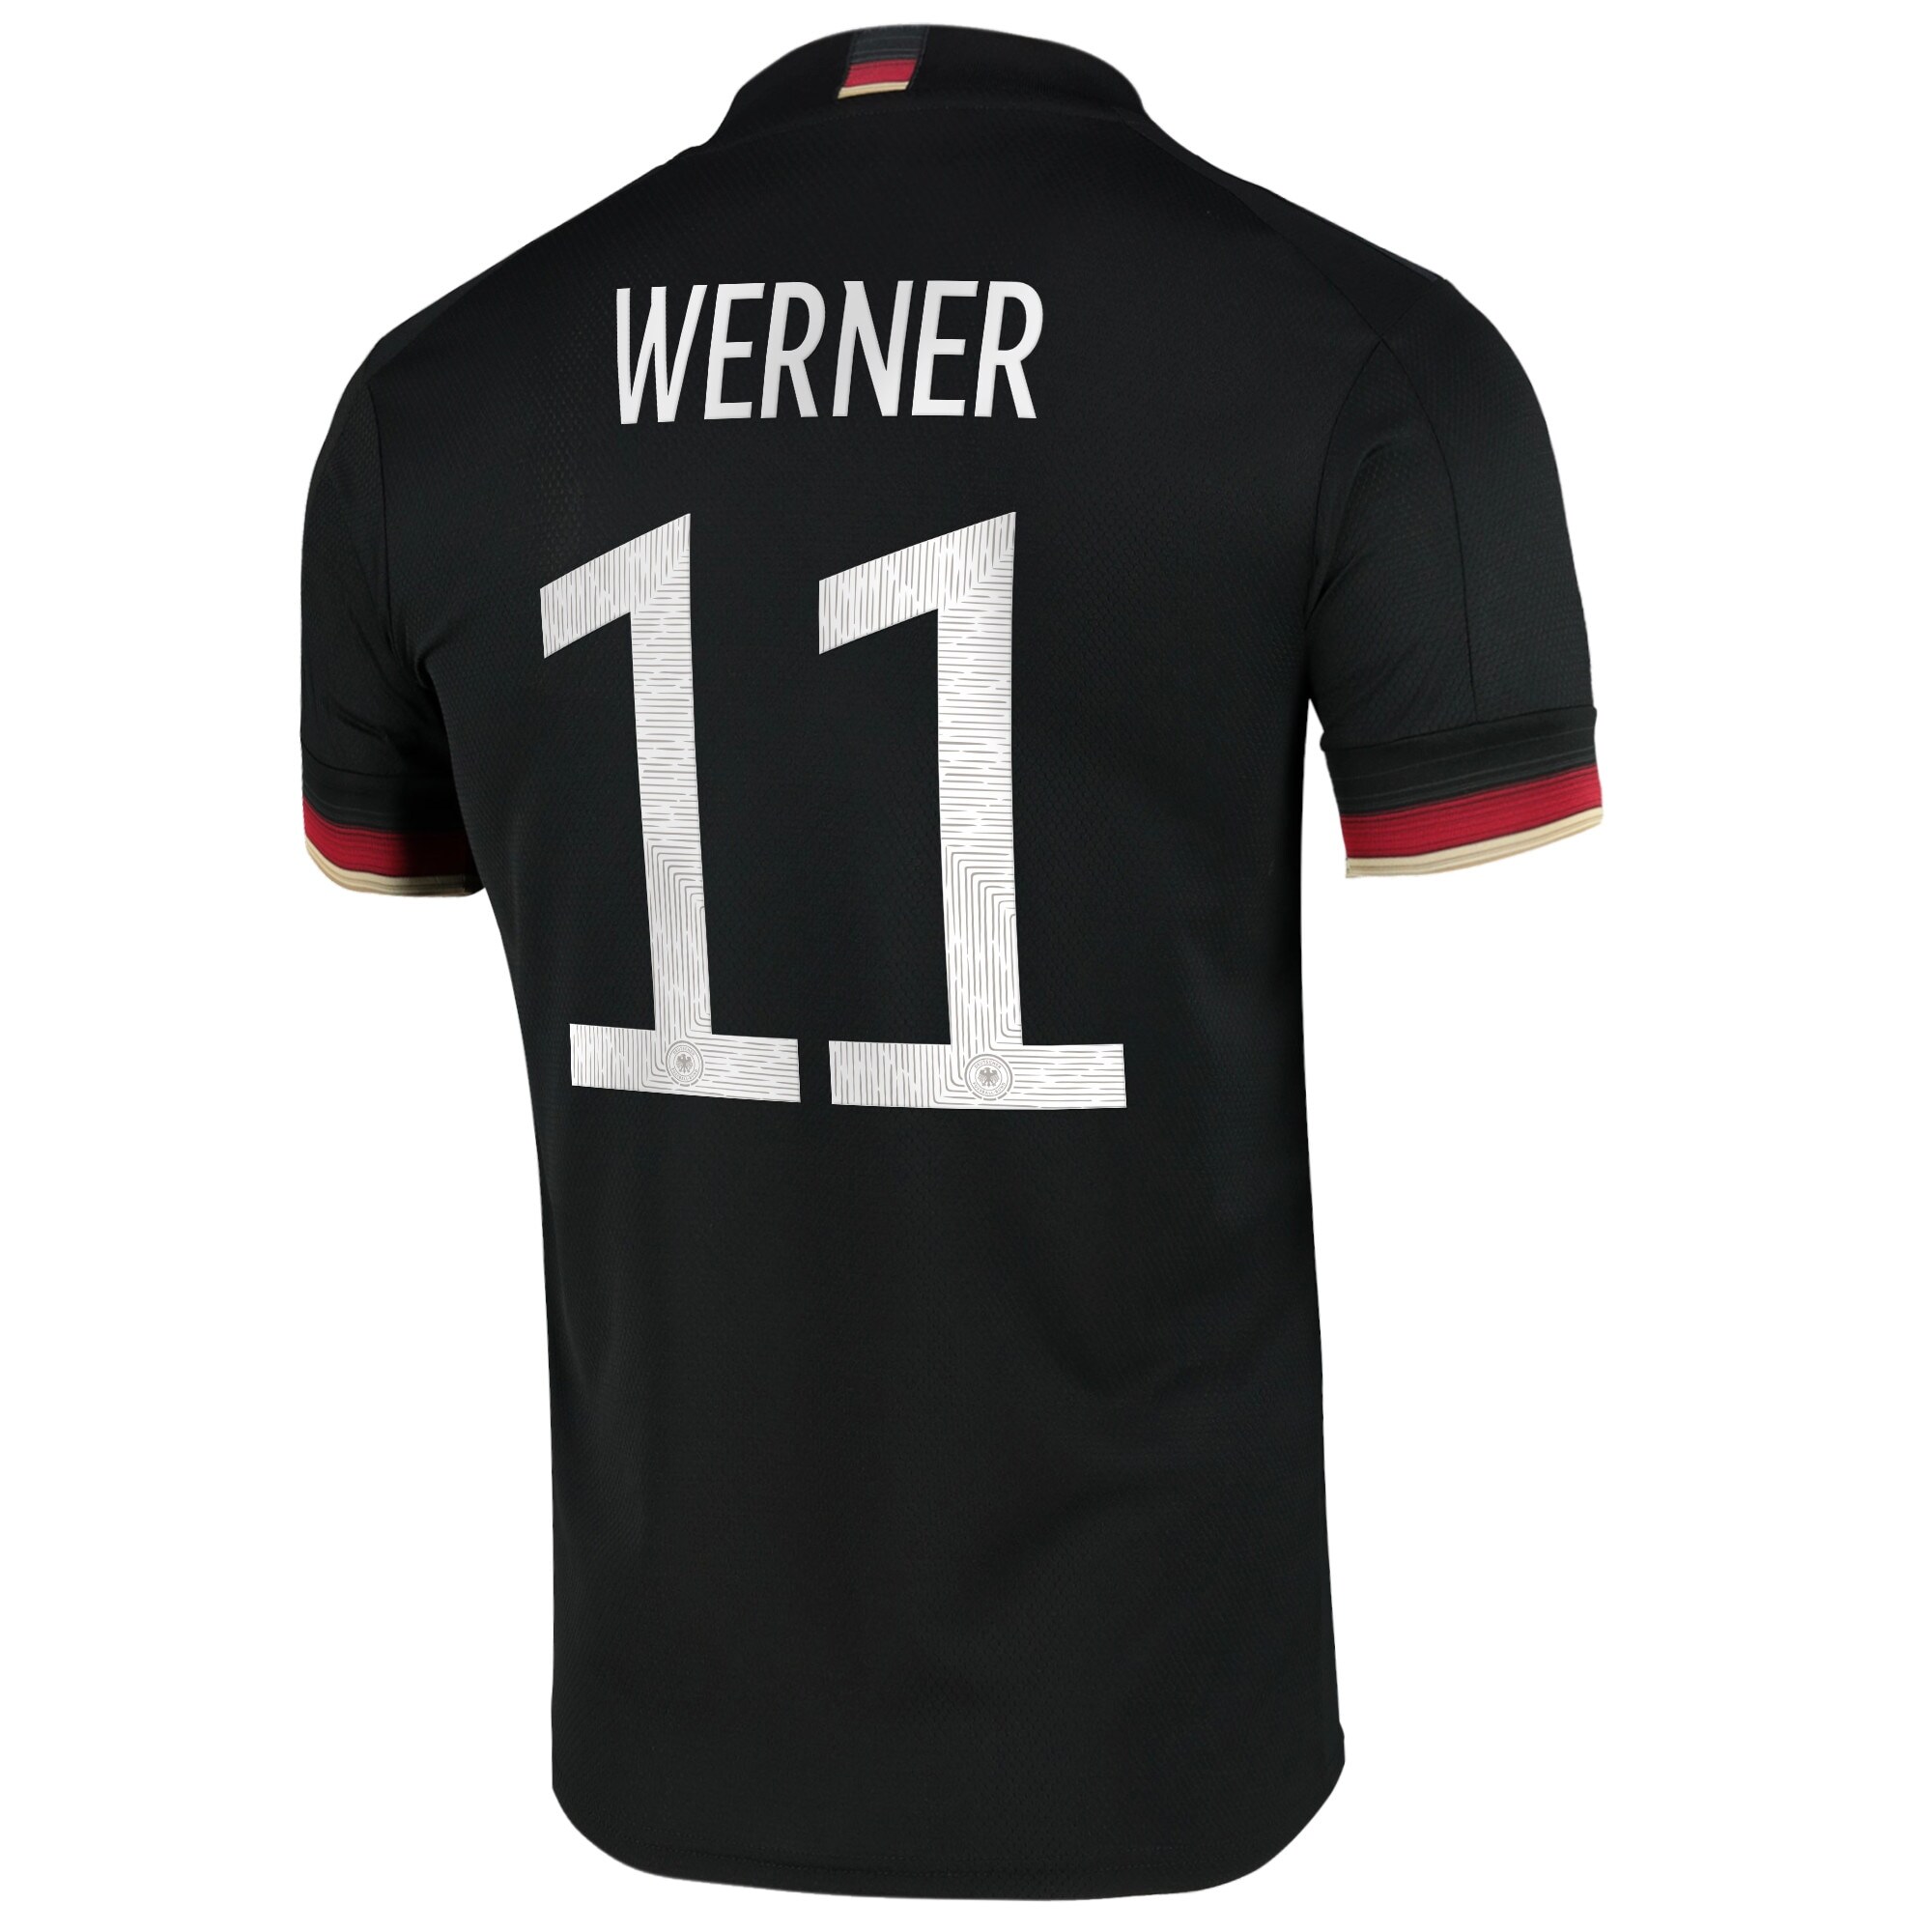 Germany Away Shirt 2021-22 with Werner 11 printing